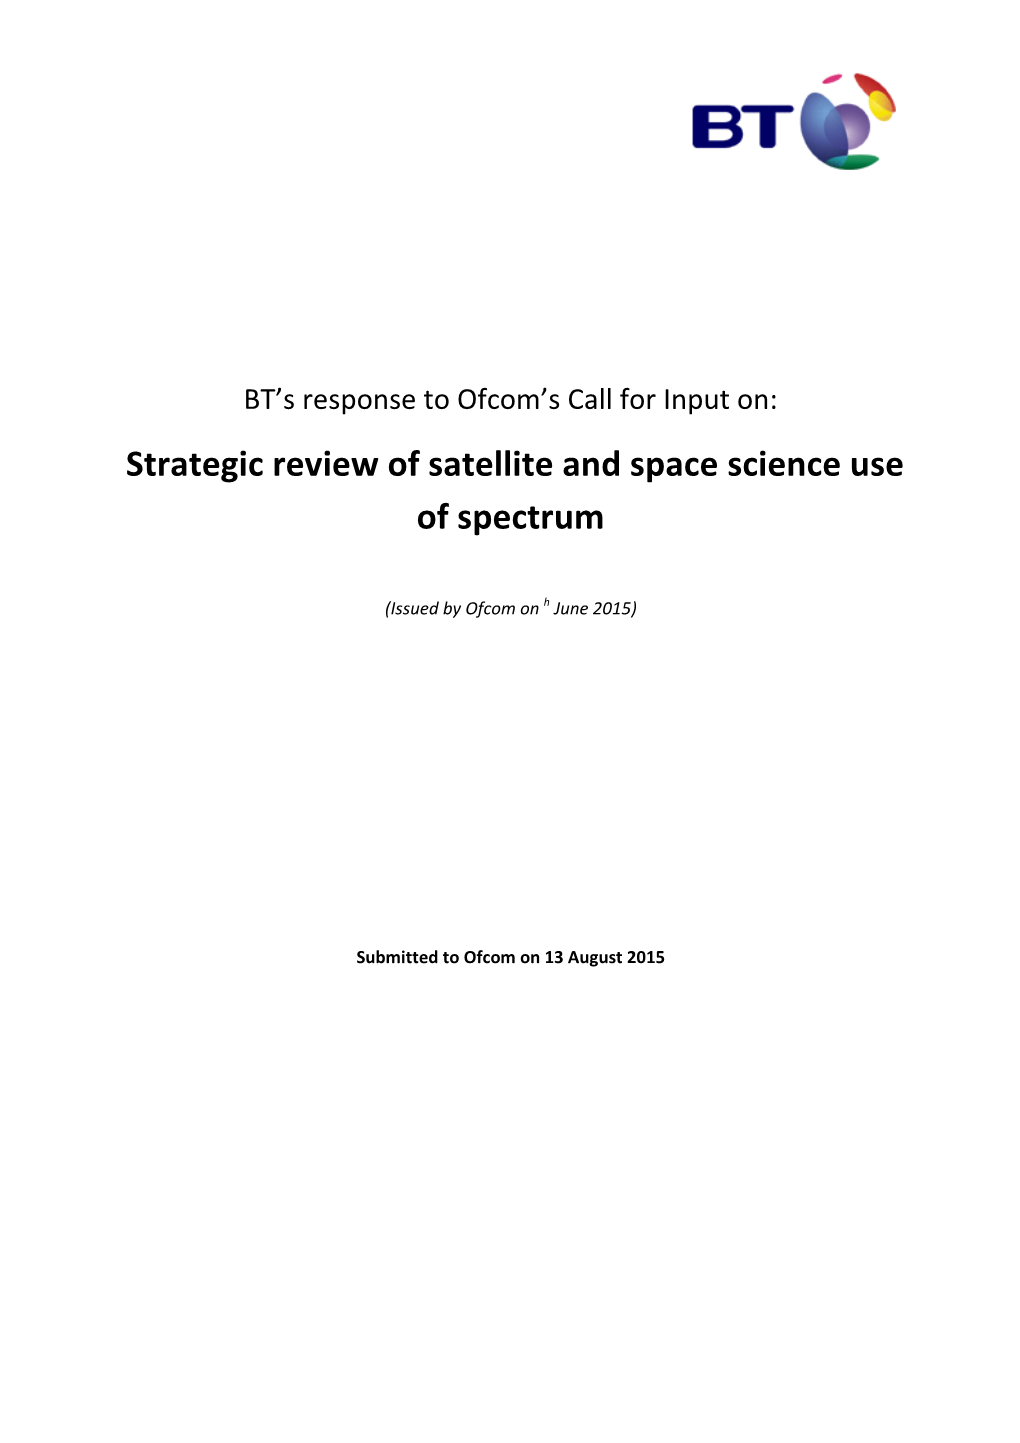 Strategic Review of Satellite and Space Science Use of Spectrum